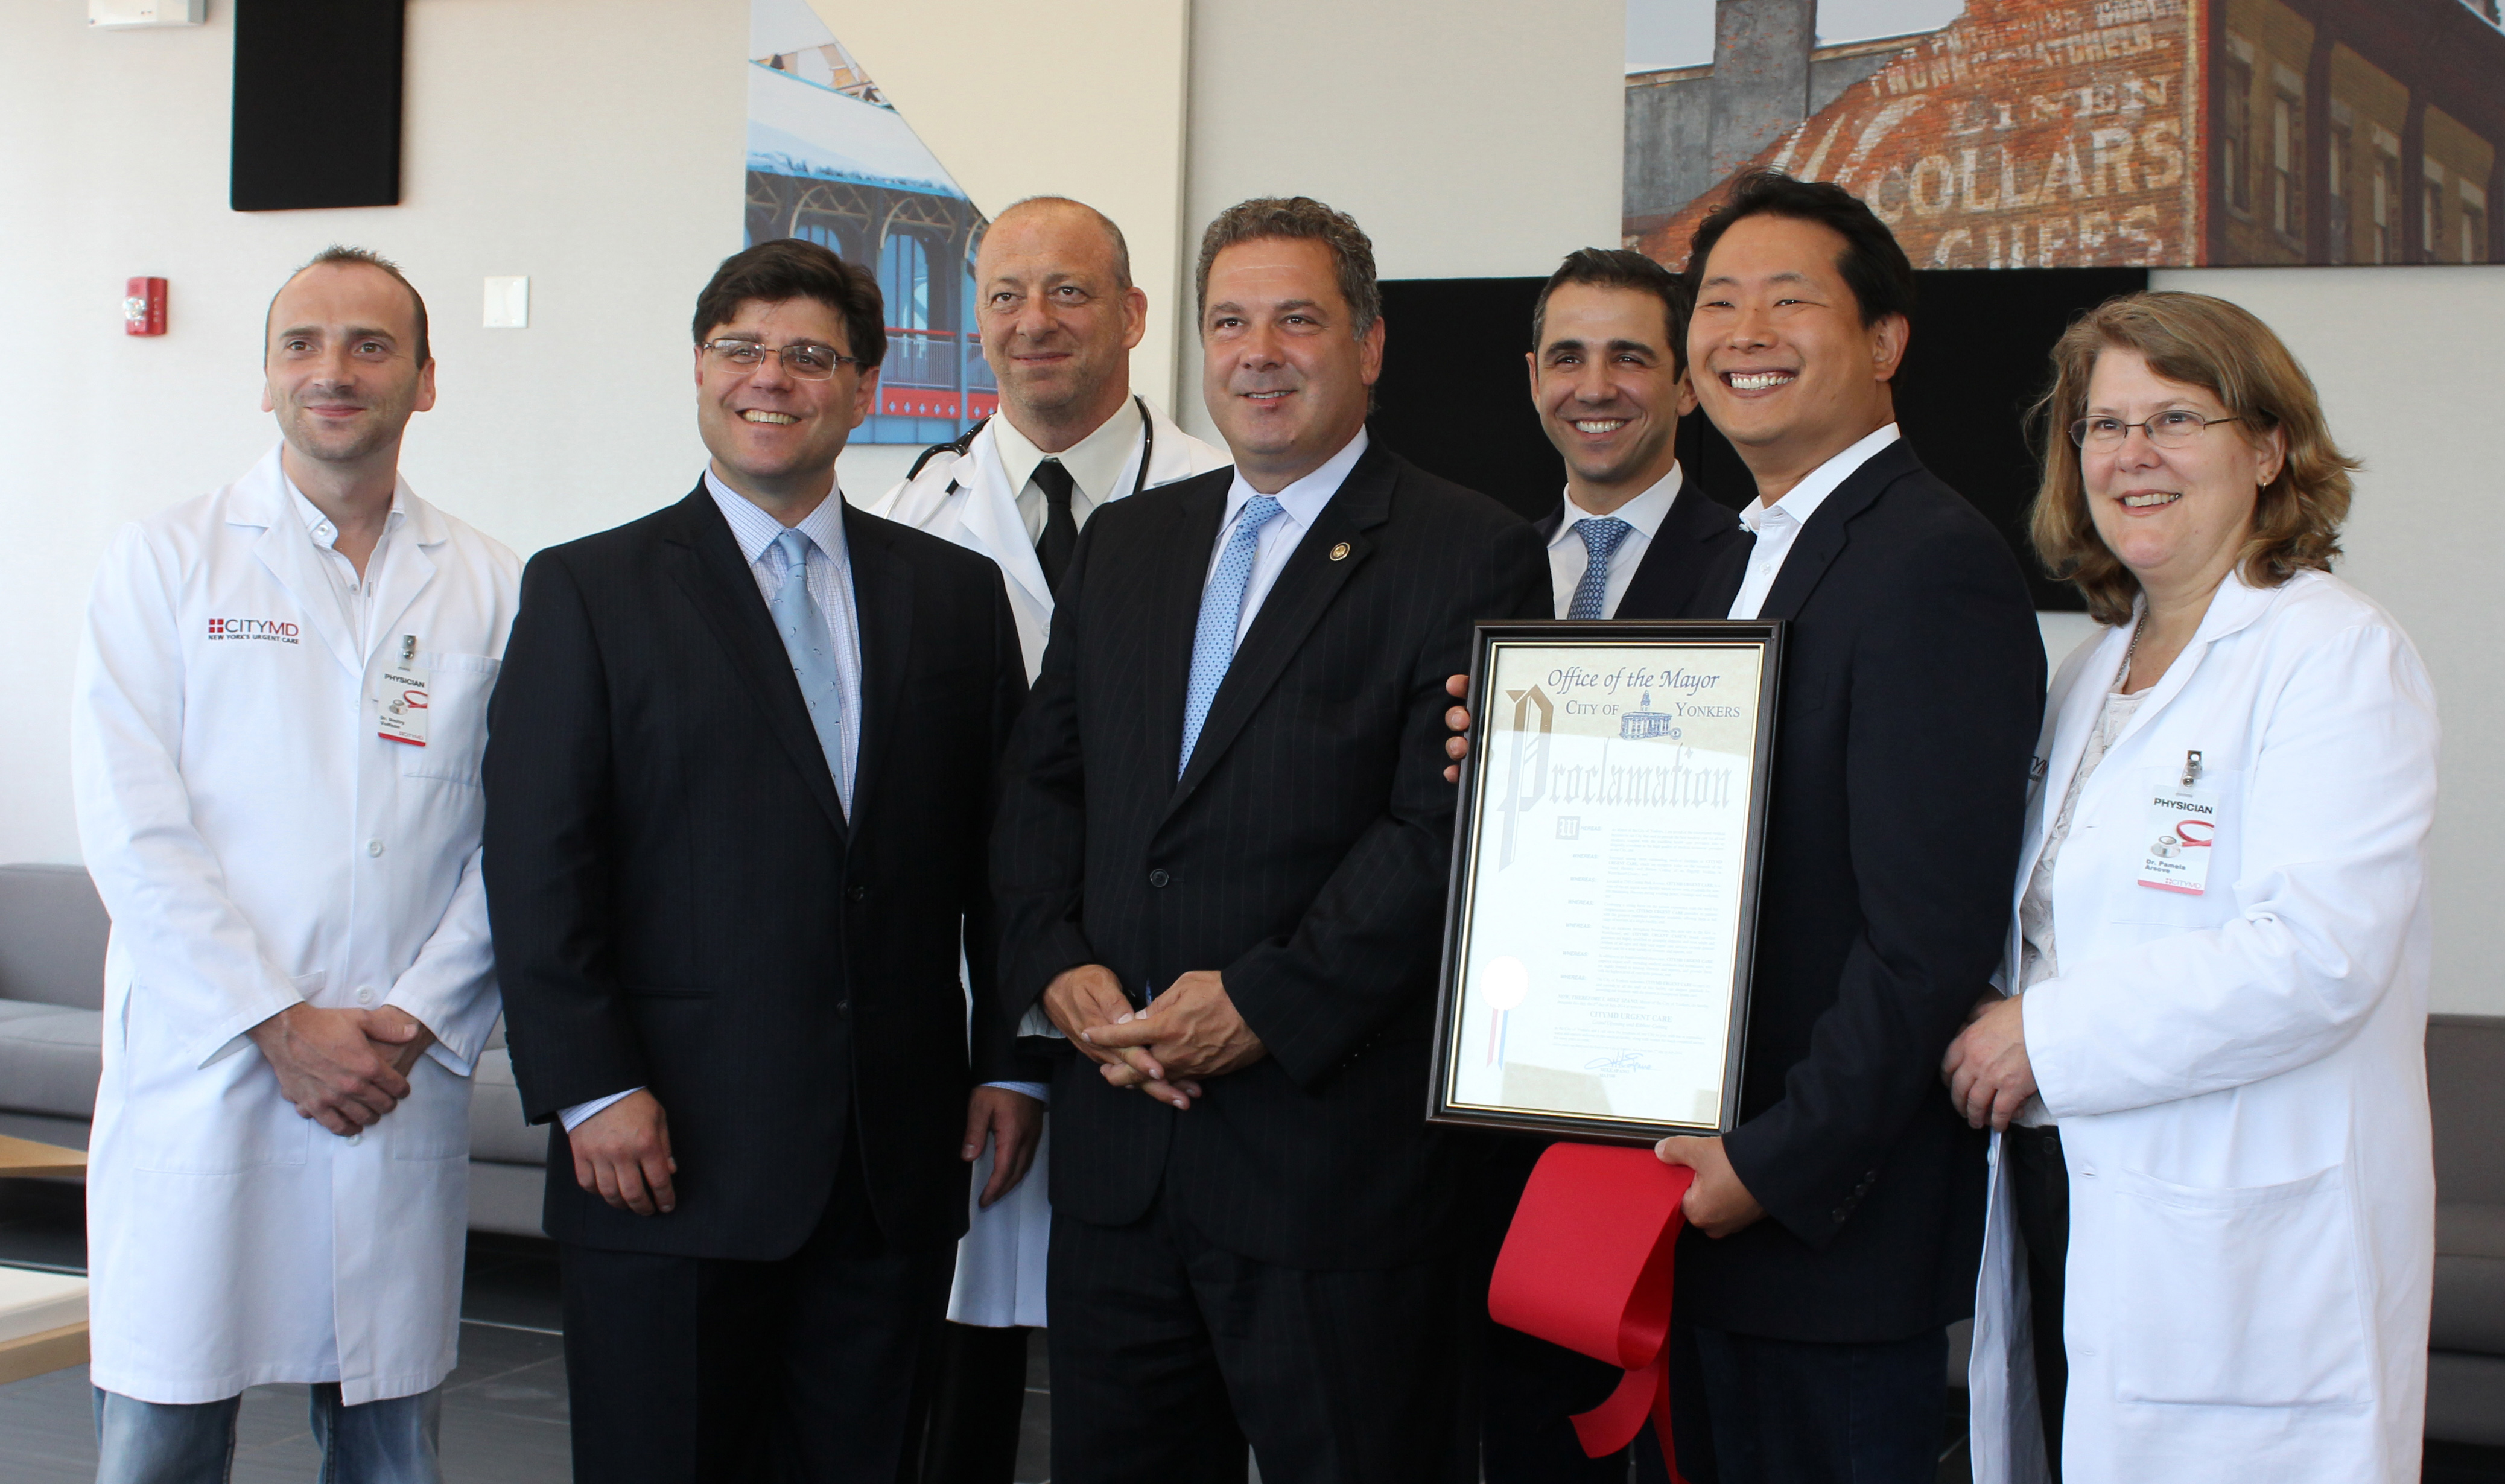 Photo Caption 1 (L to R): Pictured displaying the Proclamation from the City of Yonkers is (Front Row) CityMD Yonkers Medical Director Dr. Frank Illuzzi, City of Yonkers Mayor Mike Spano and CityMD Ch